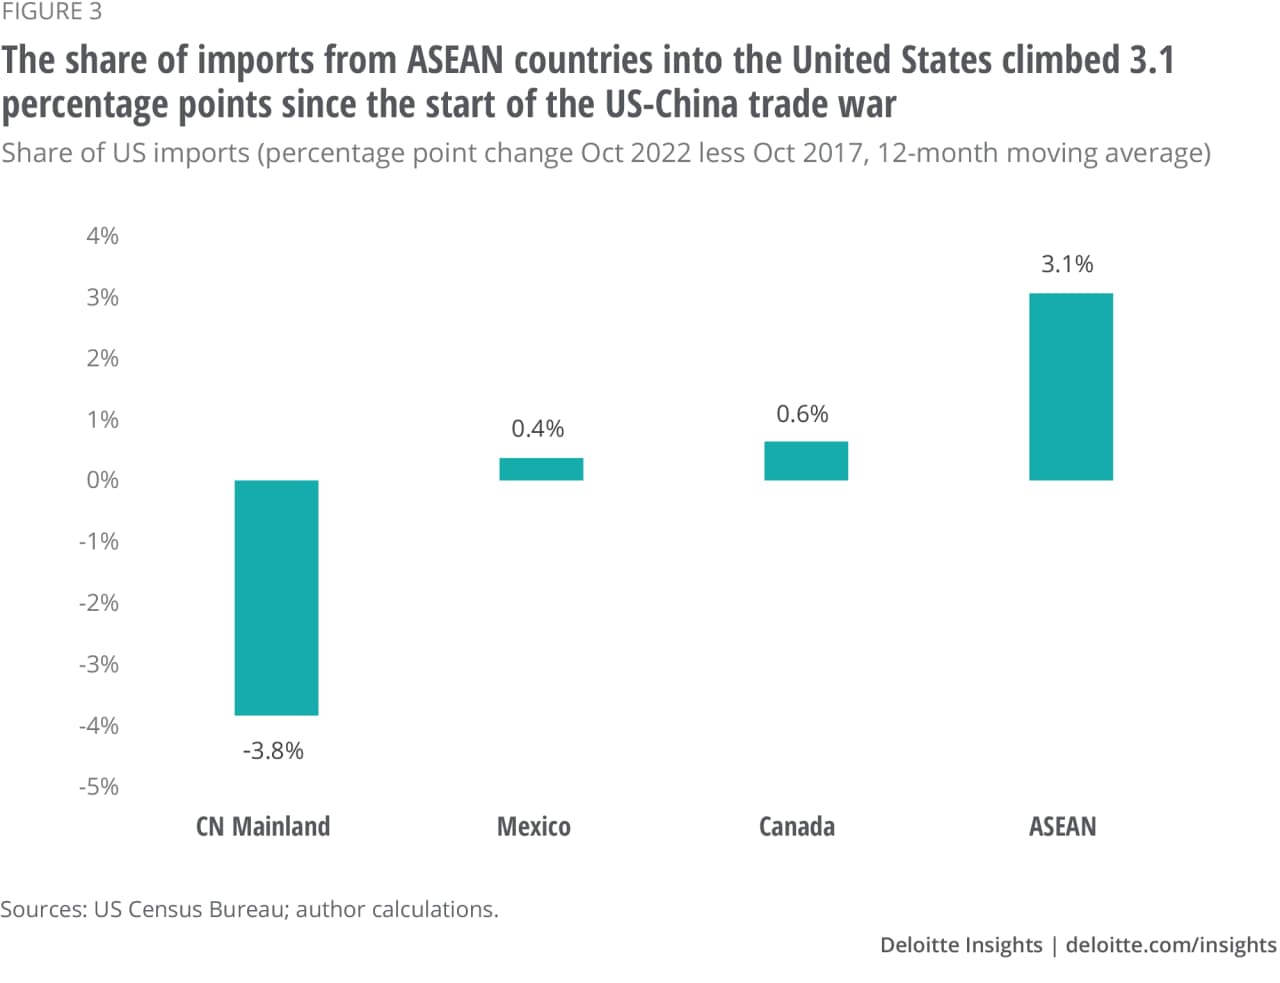 Figure 3. The share of imports from ASEAN countries into United States climbed 3.1 percentage points since the start of the US-Chine trade war